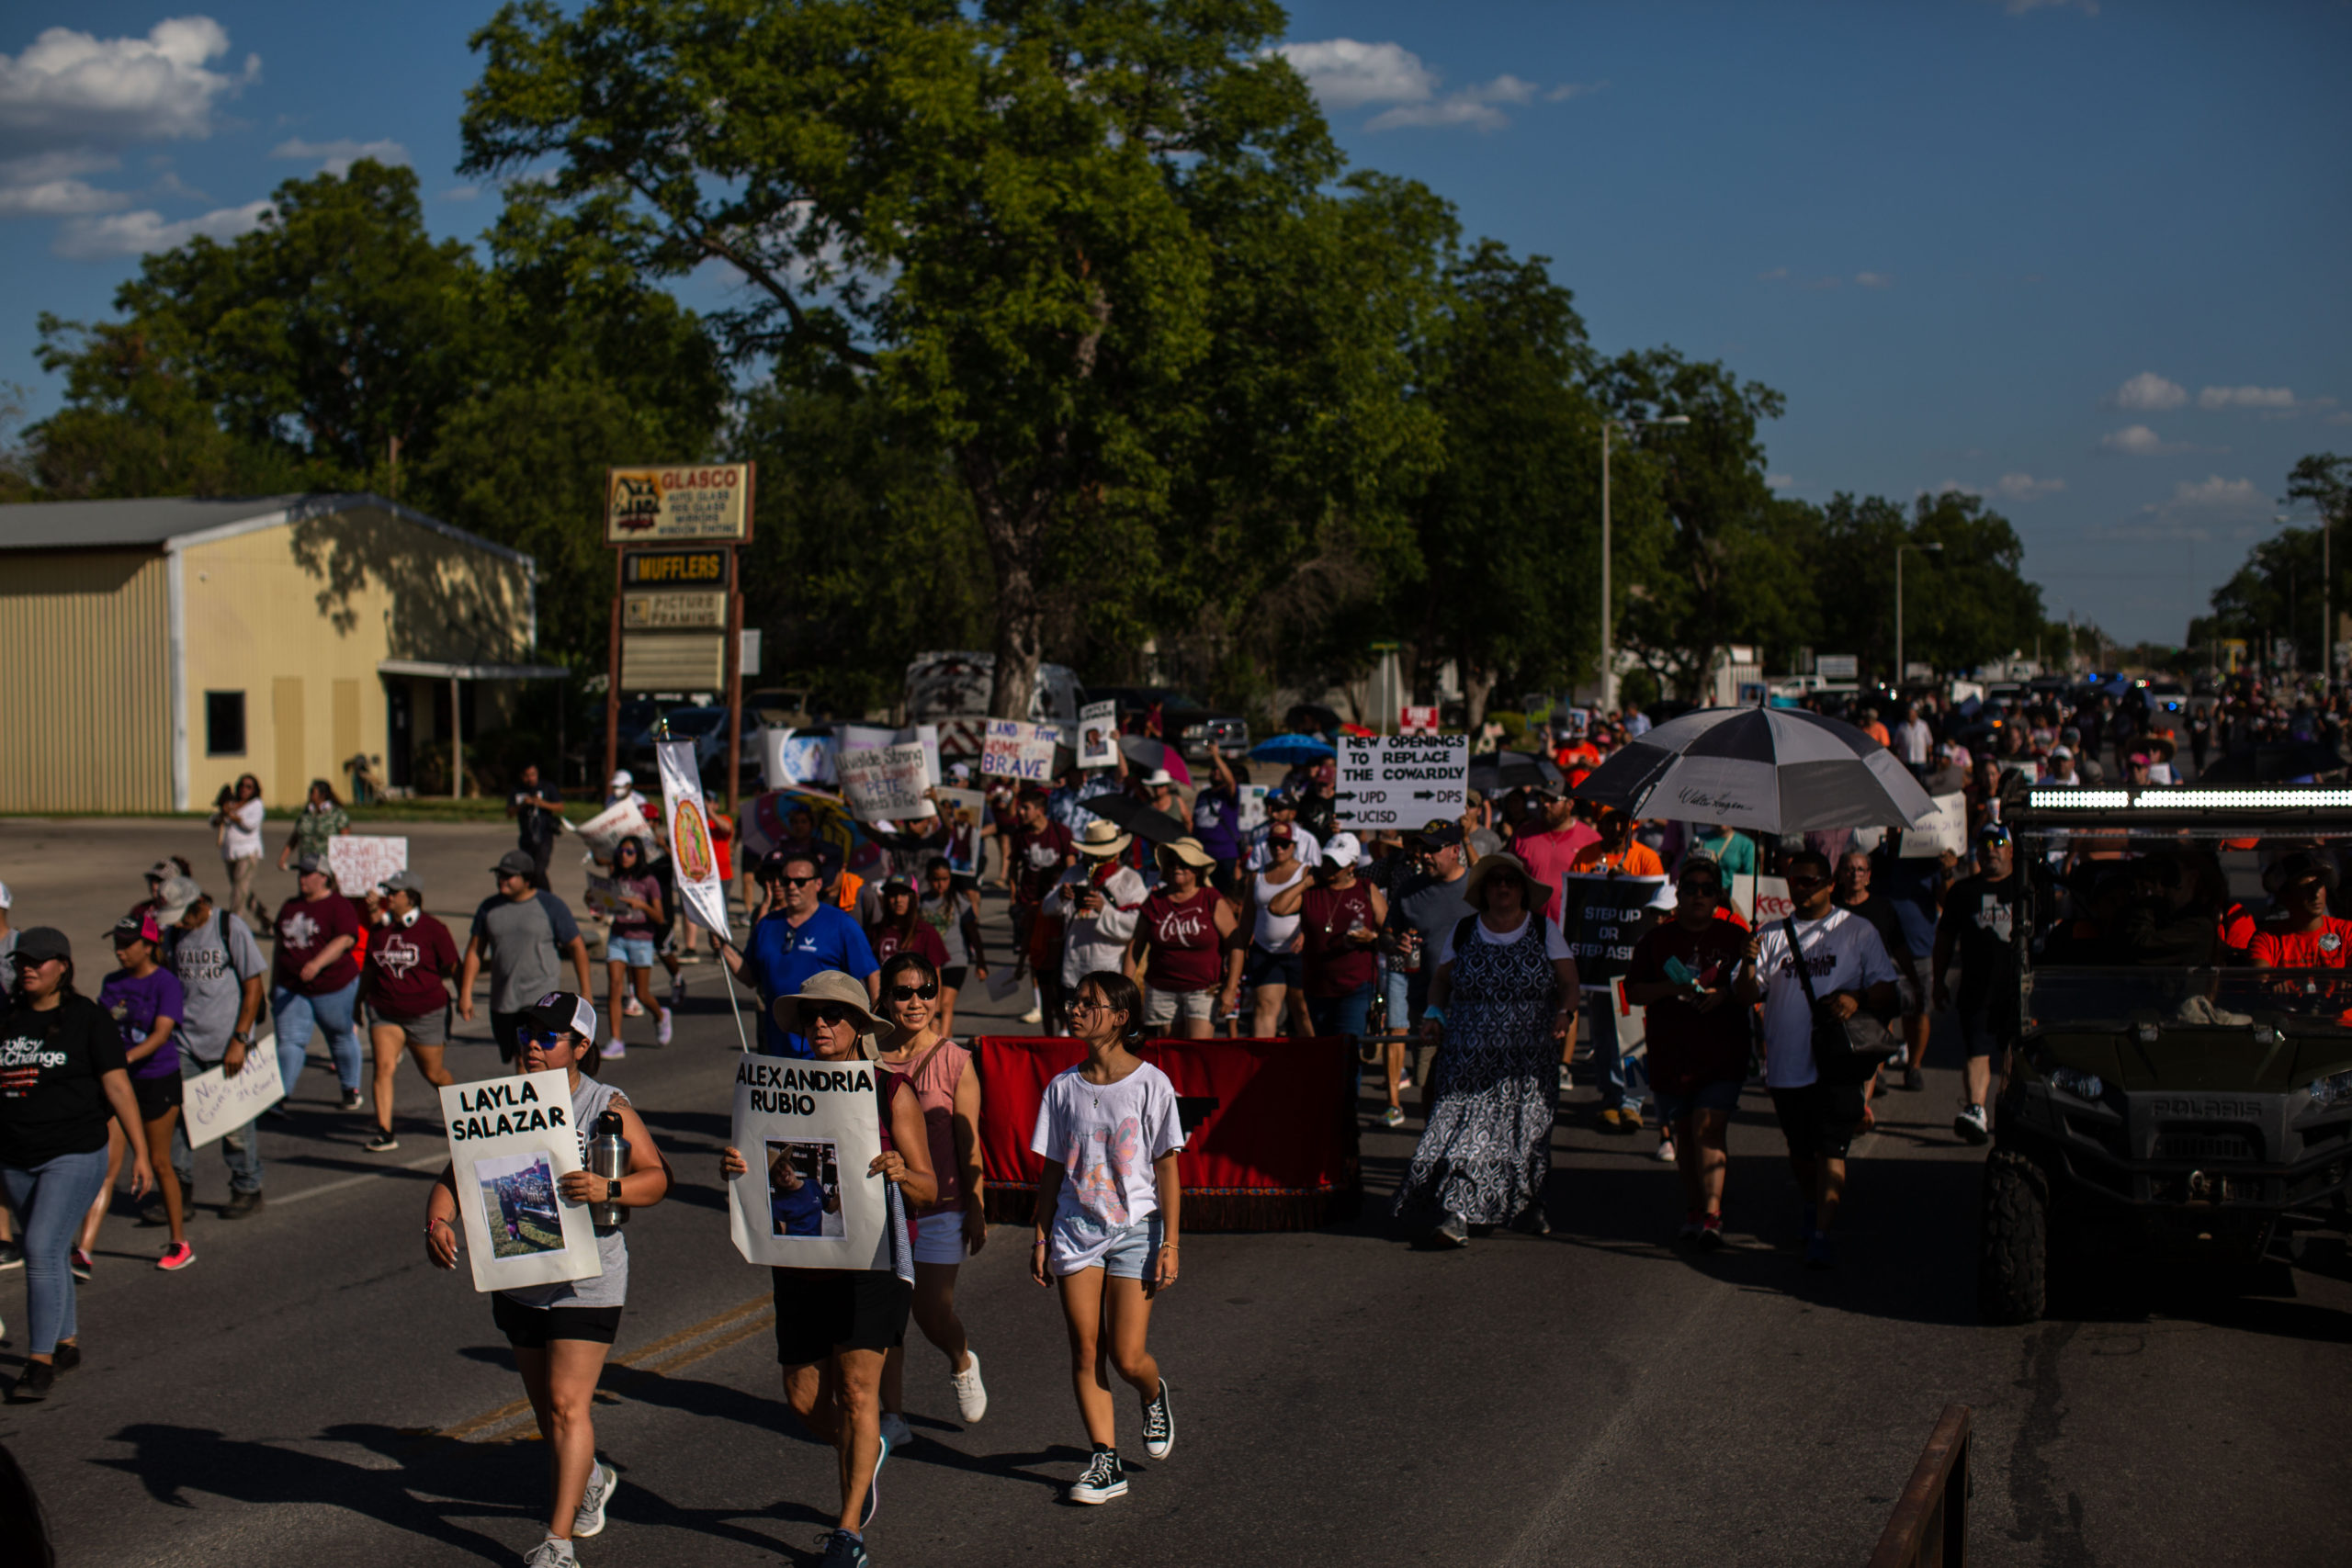 THE CROWD MARCHES ALONG GETTY STREET ON JULY 10. KAYLEE GREENLEE BEAL/TEXAS OBSERVER